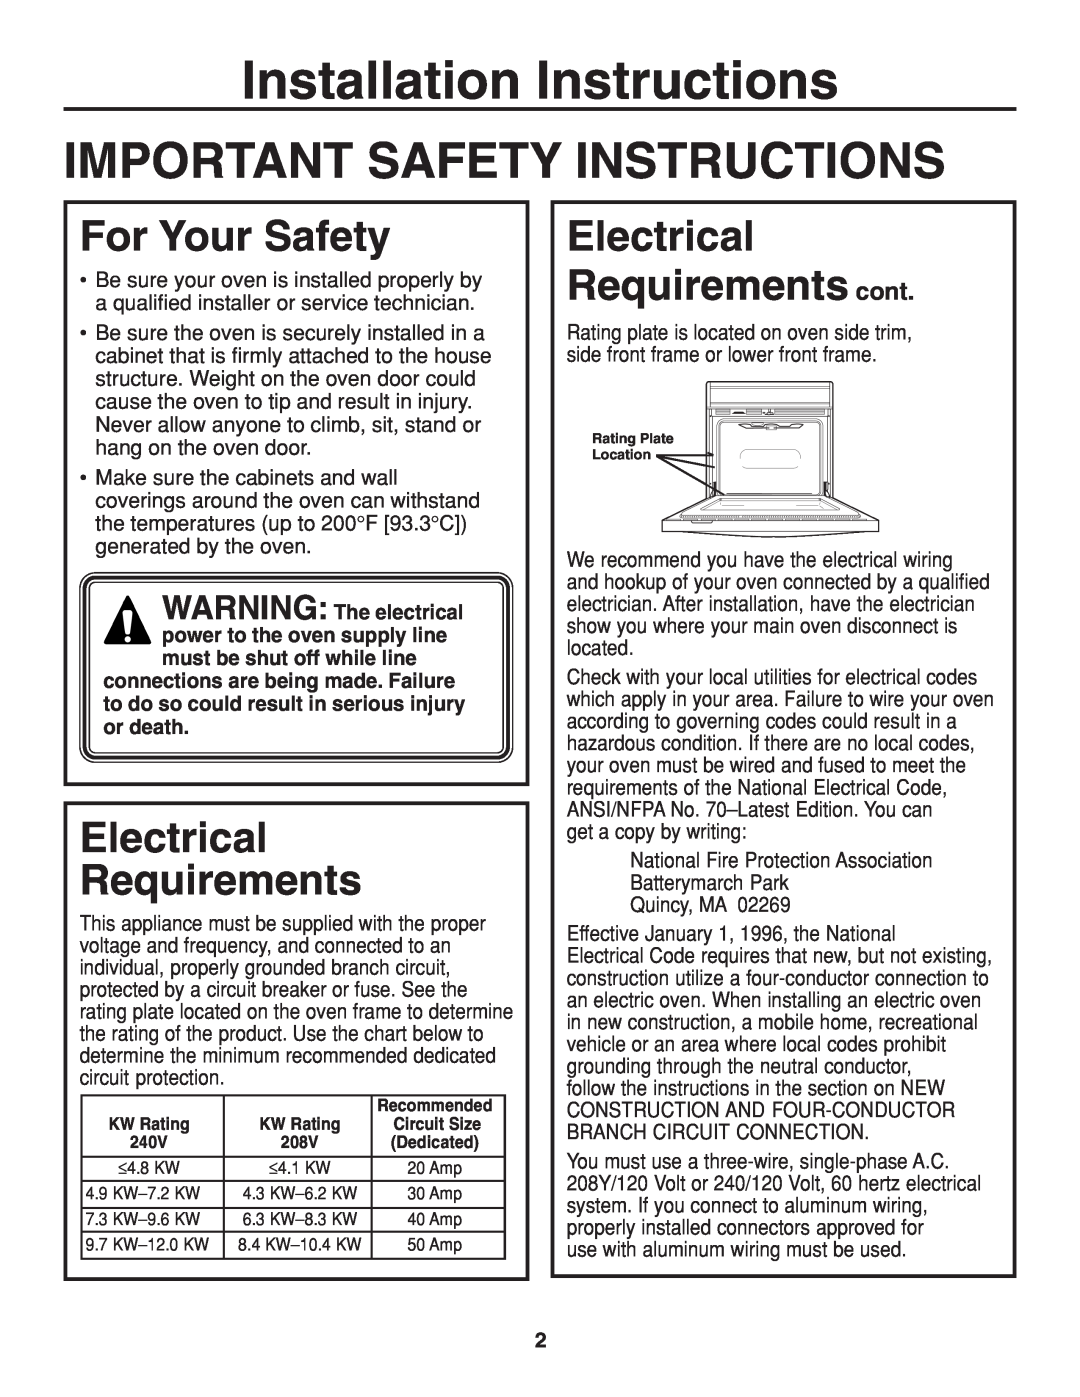 GE r08654v-1 Installation Instructions, Important Safety Instructions, For Your Safety, Electrical Requirements 